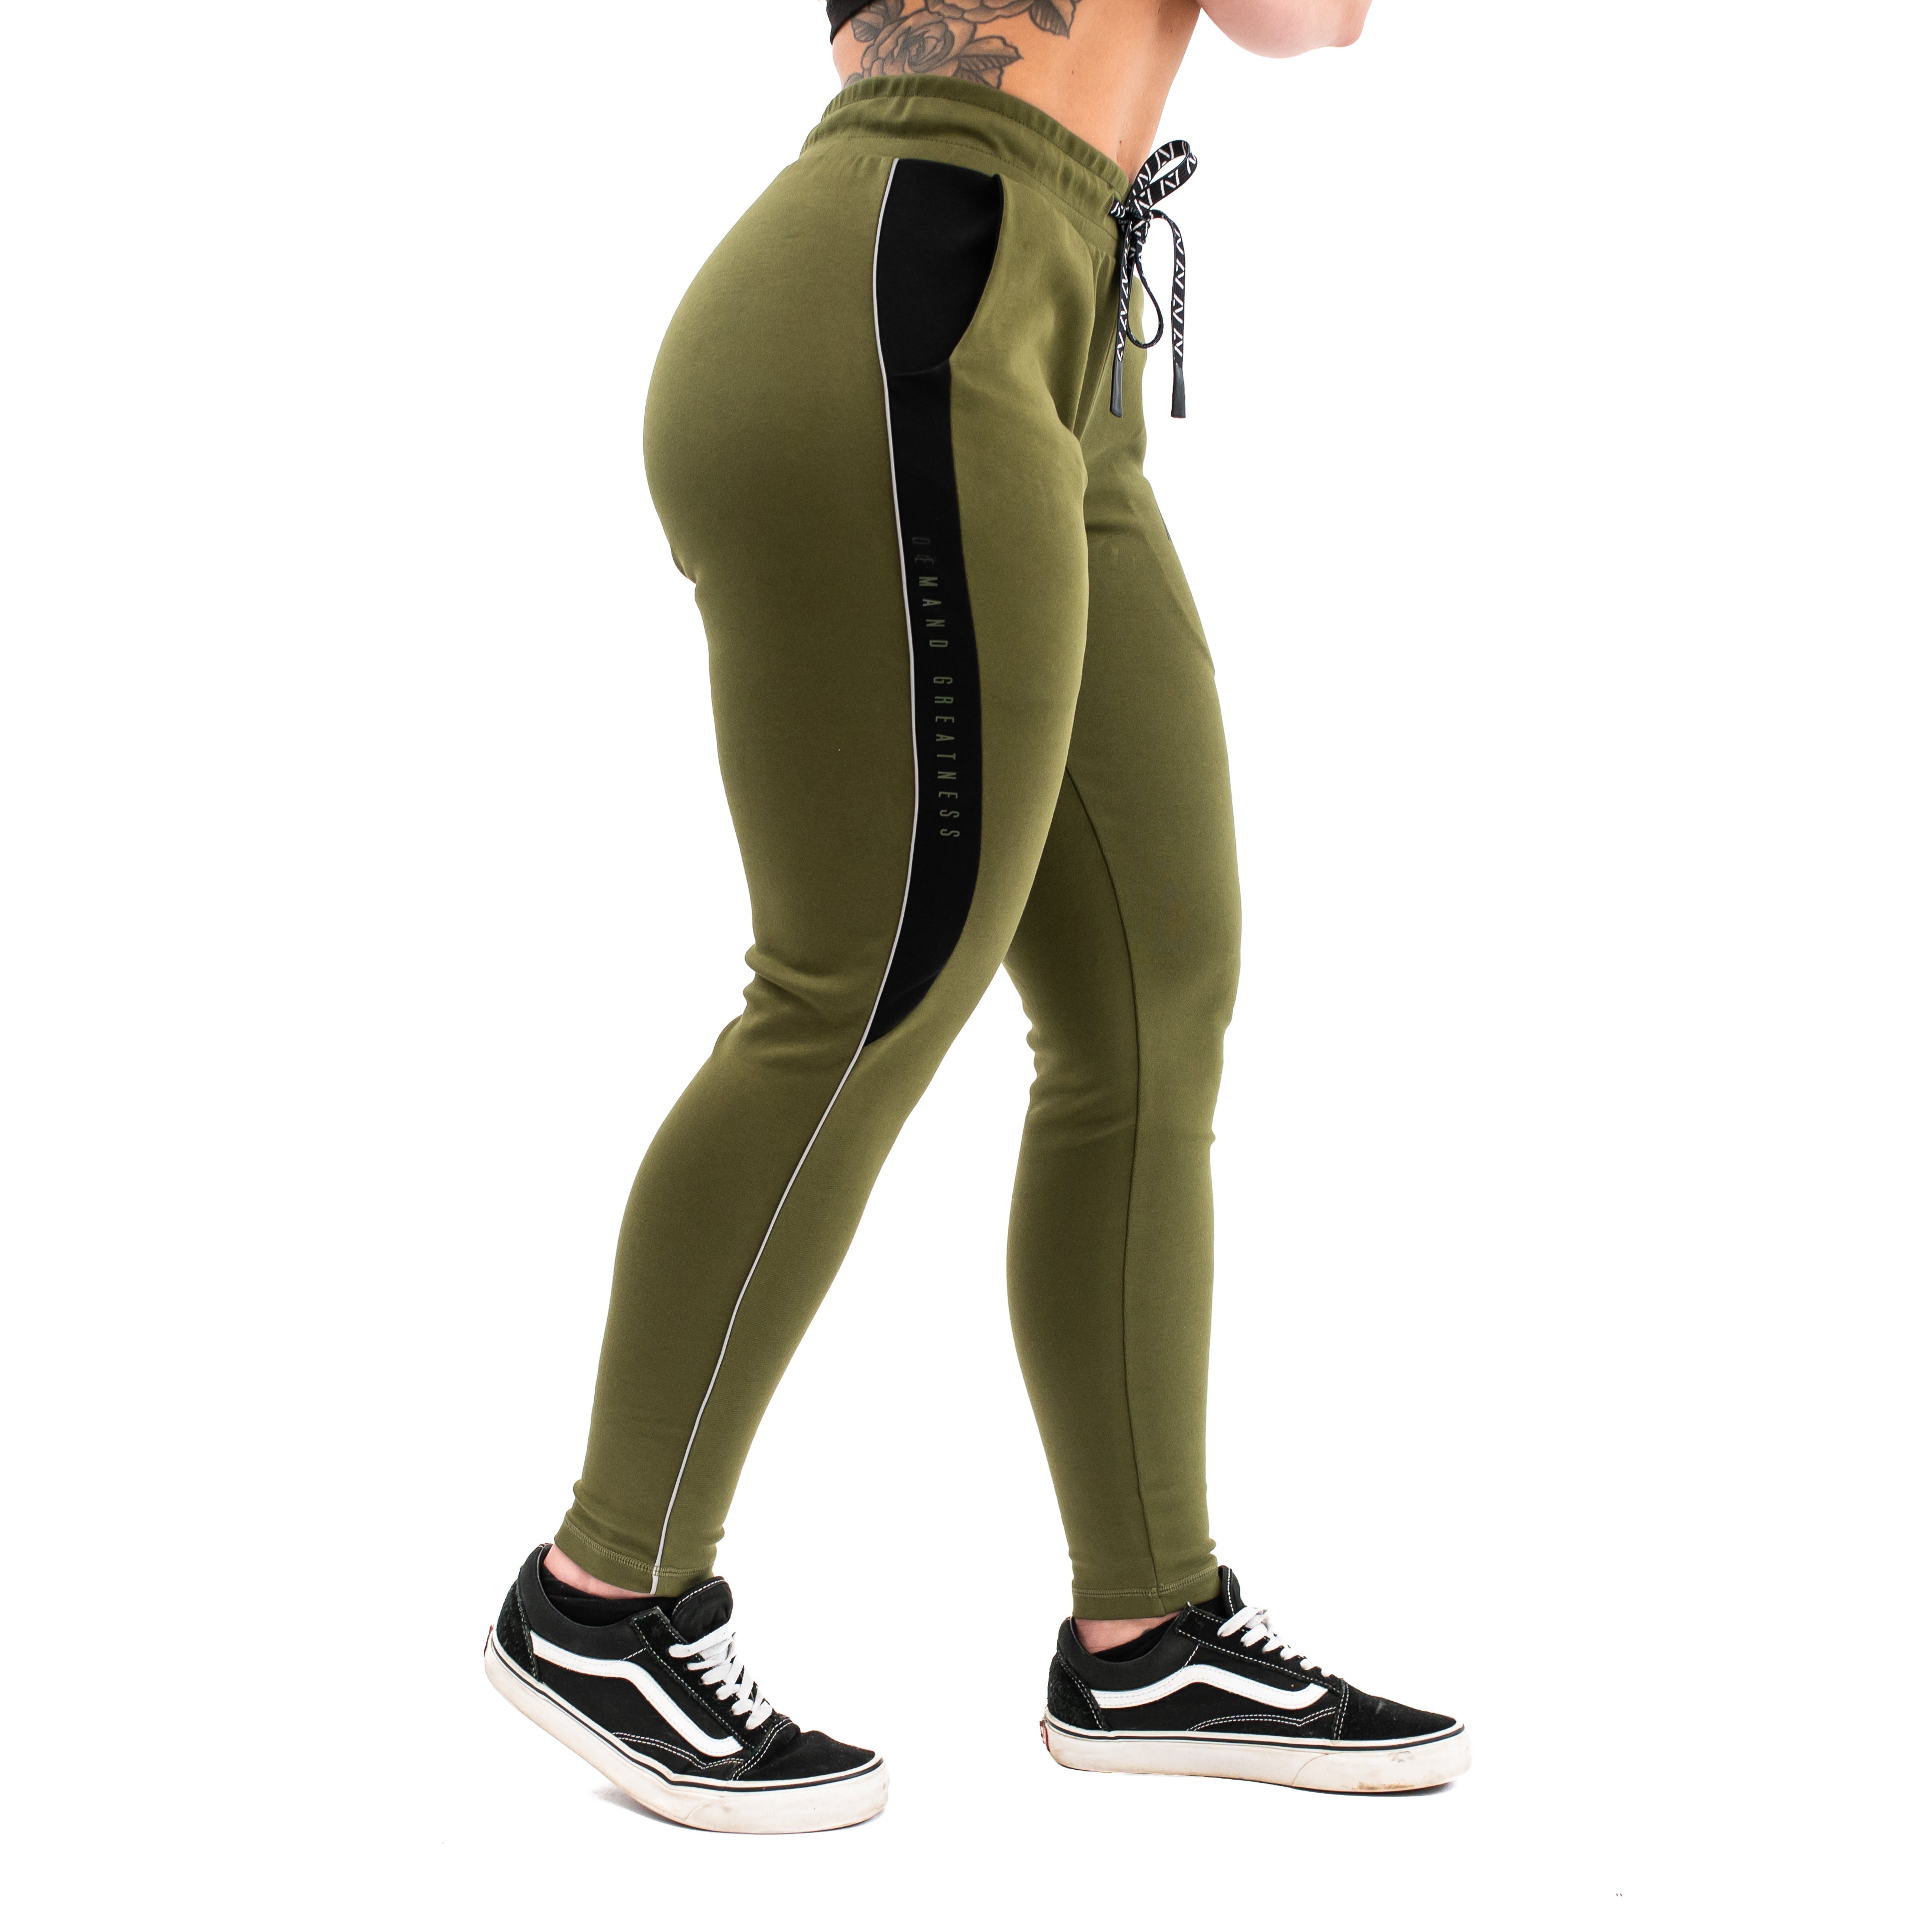 Our Moxie Joggers are made with premium cotton spandex fabric to keep you comfy throughout the day whether you are training or going out! Our Moxie Joggers contour to your body and feature a reflective stripe on both side, deep un-zippered pockets and stealth matte logos. Now in our new military colourway. You can purchase Military Moxie joggers from A7 UK or A7 Europe. A7 UK shipping to UK, Ireland, France, Italy, Germany, the Netherlands, Sweden and Poland.